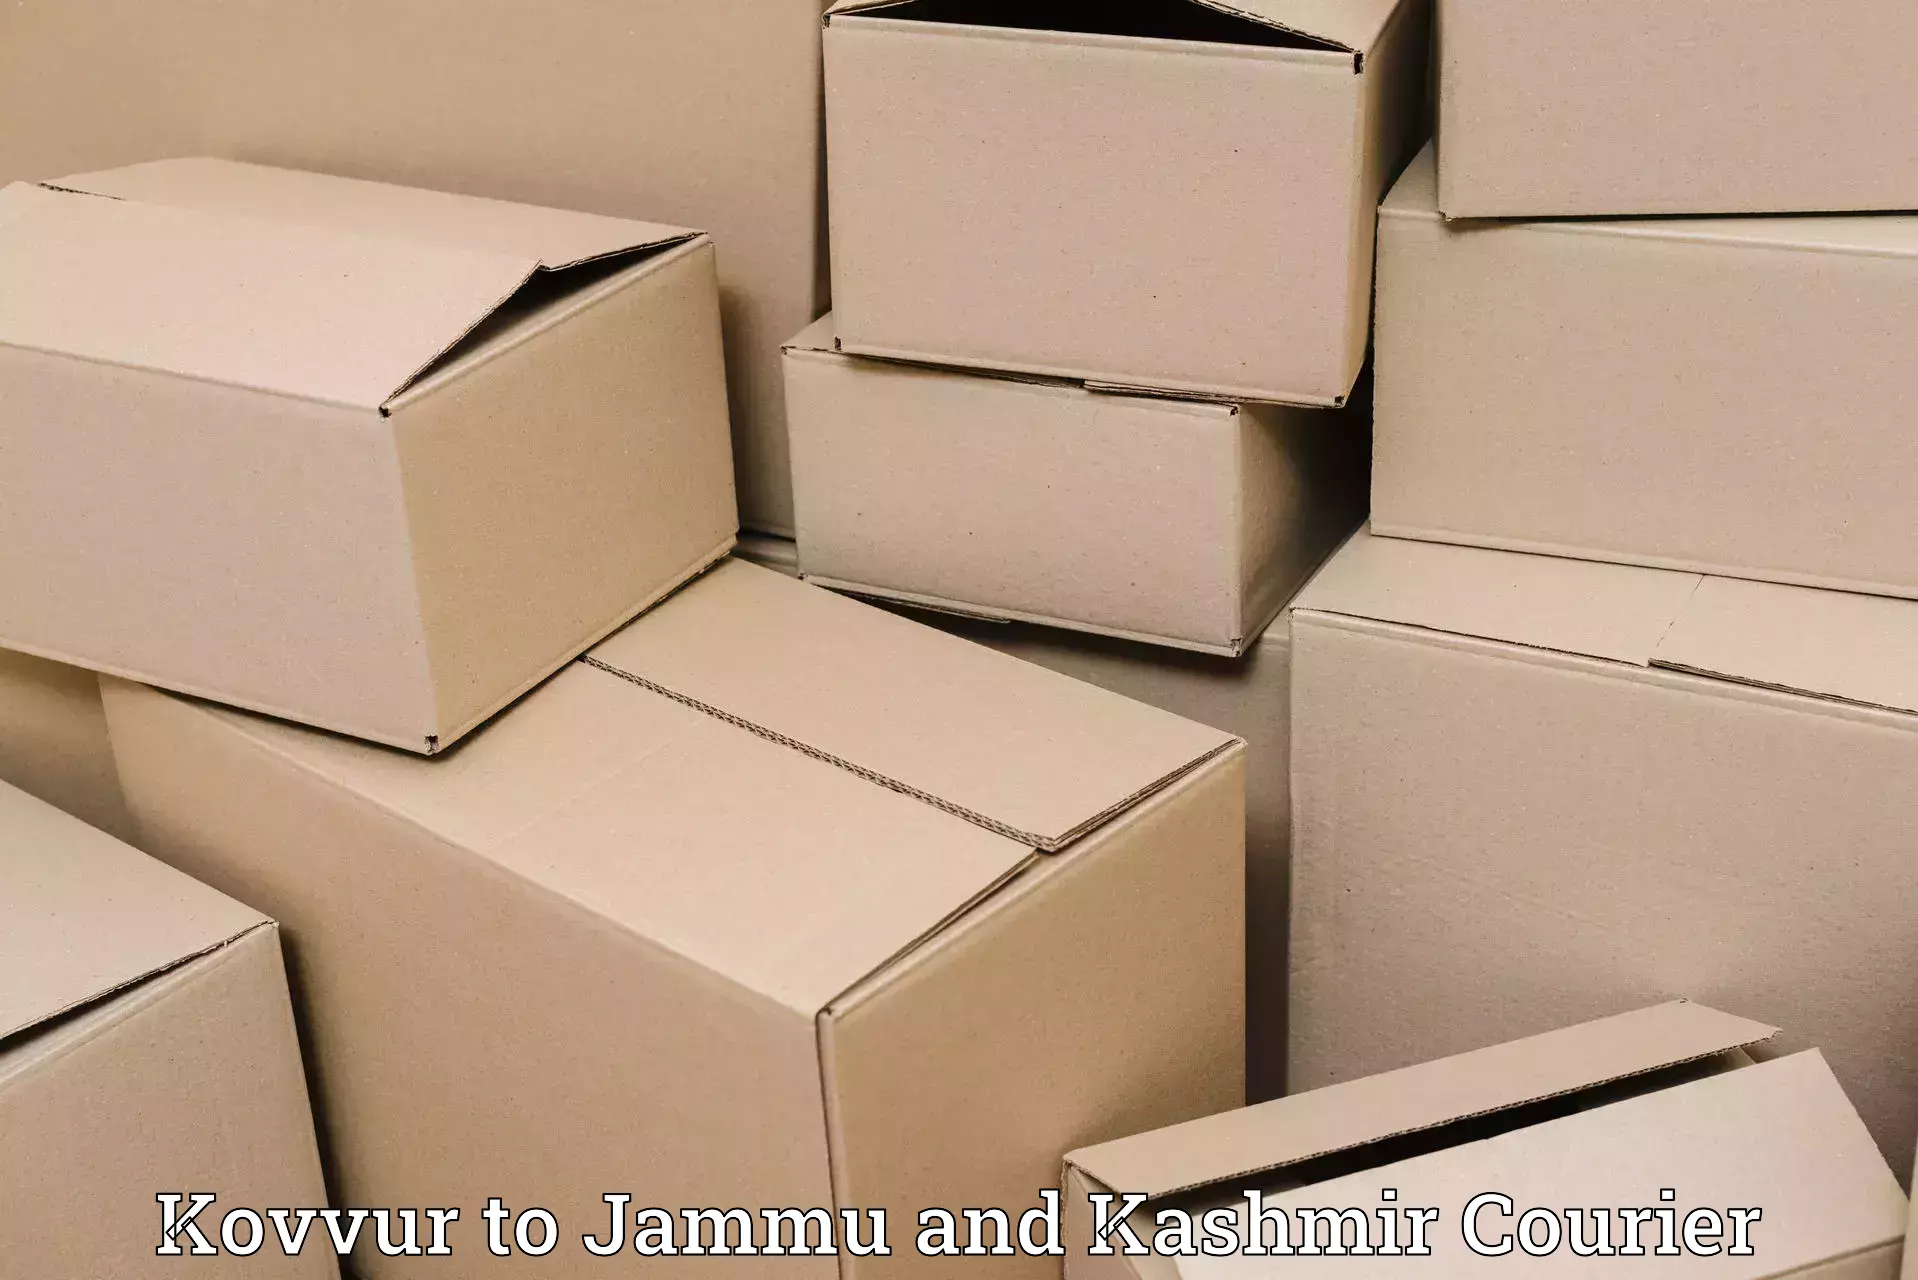 On-call courier service Kovvur to Shopian